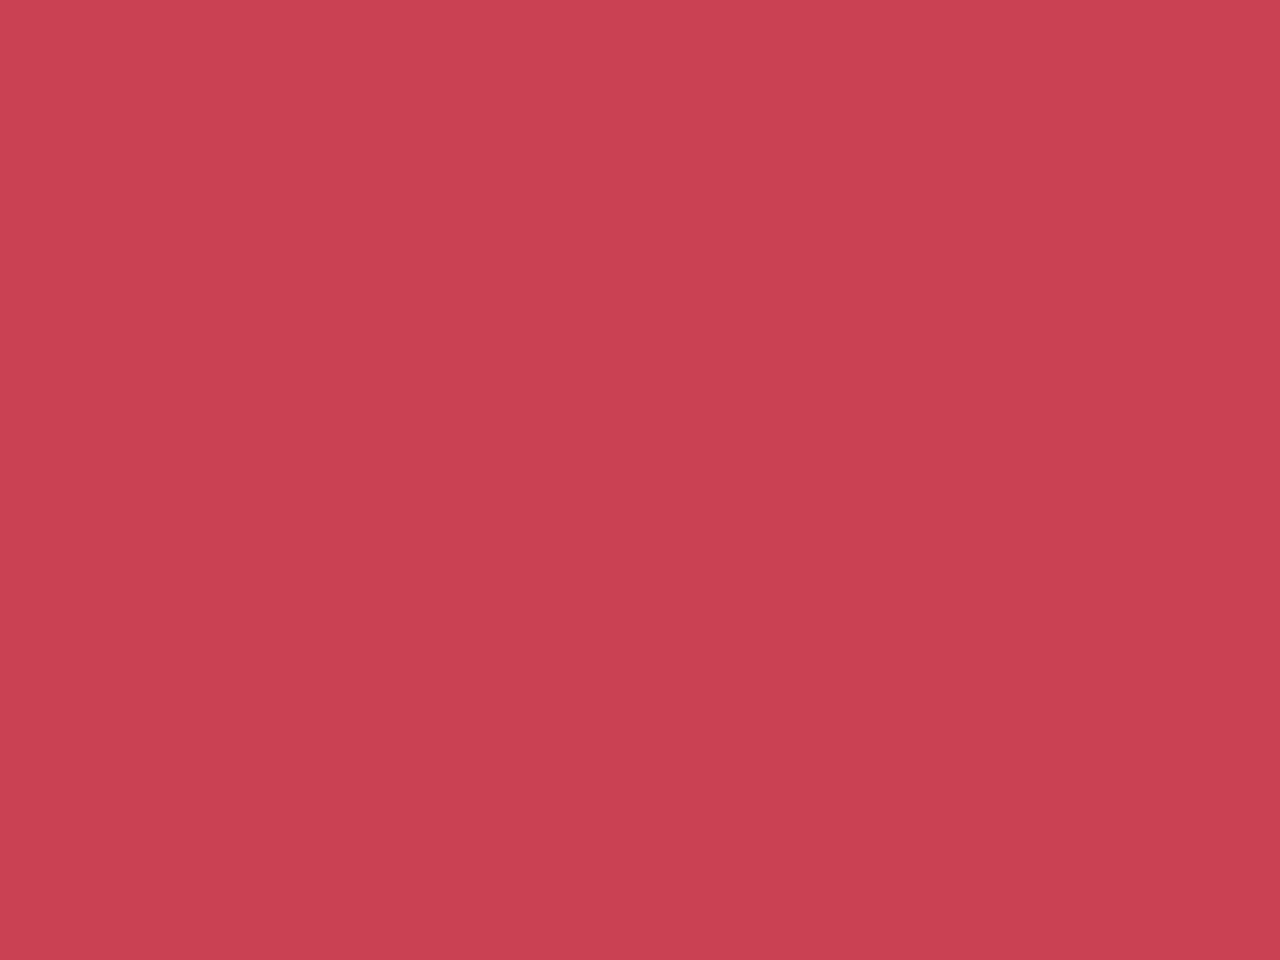 1280x960 Brick Red Solid Color Background